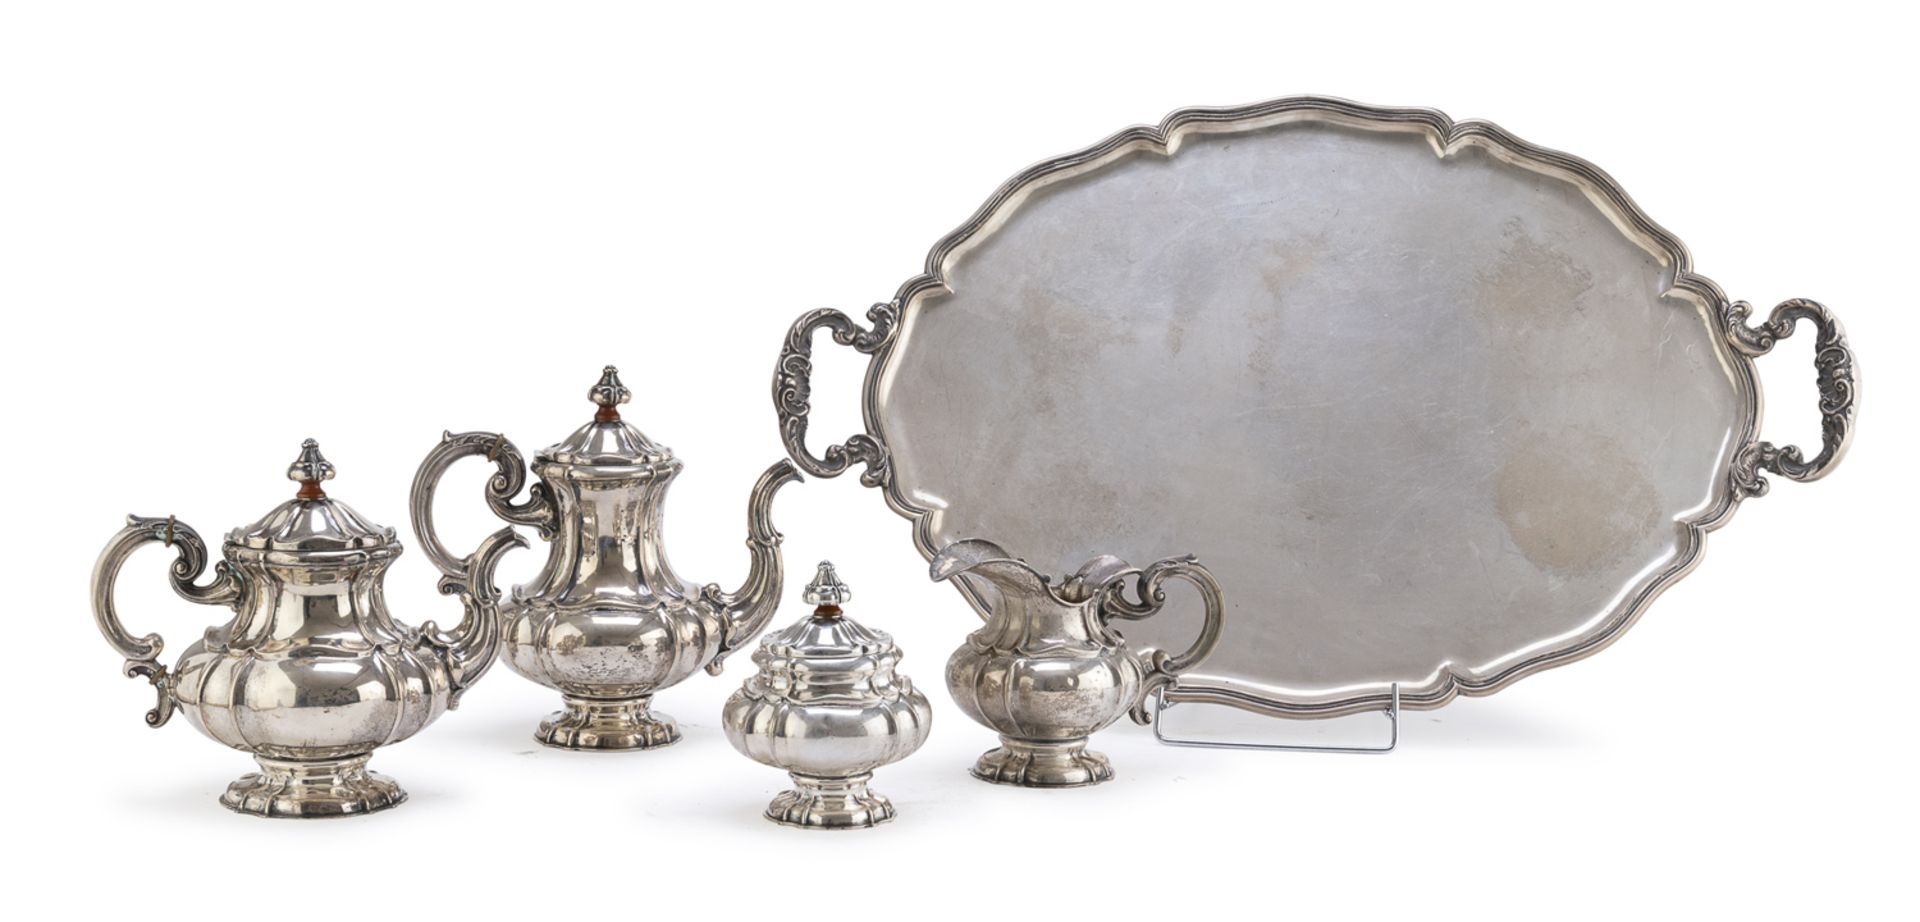 SILVER TEA AND COFFEE SET ITALY EARLY 19TH CENTURY